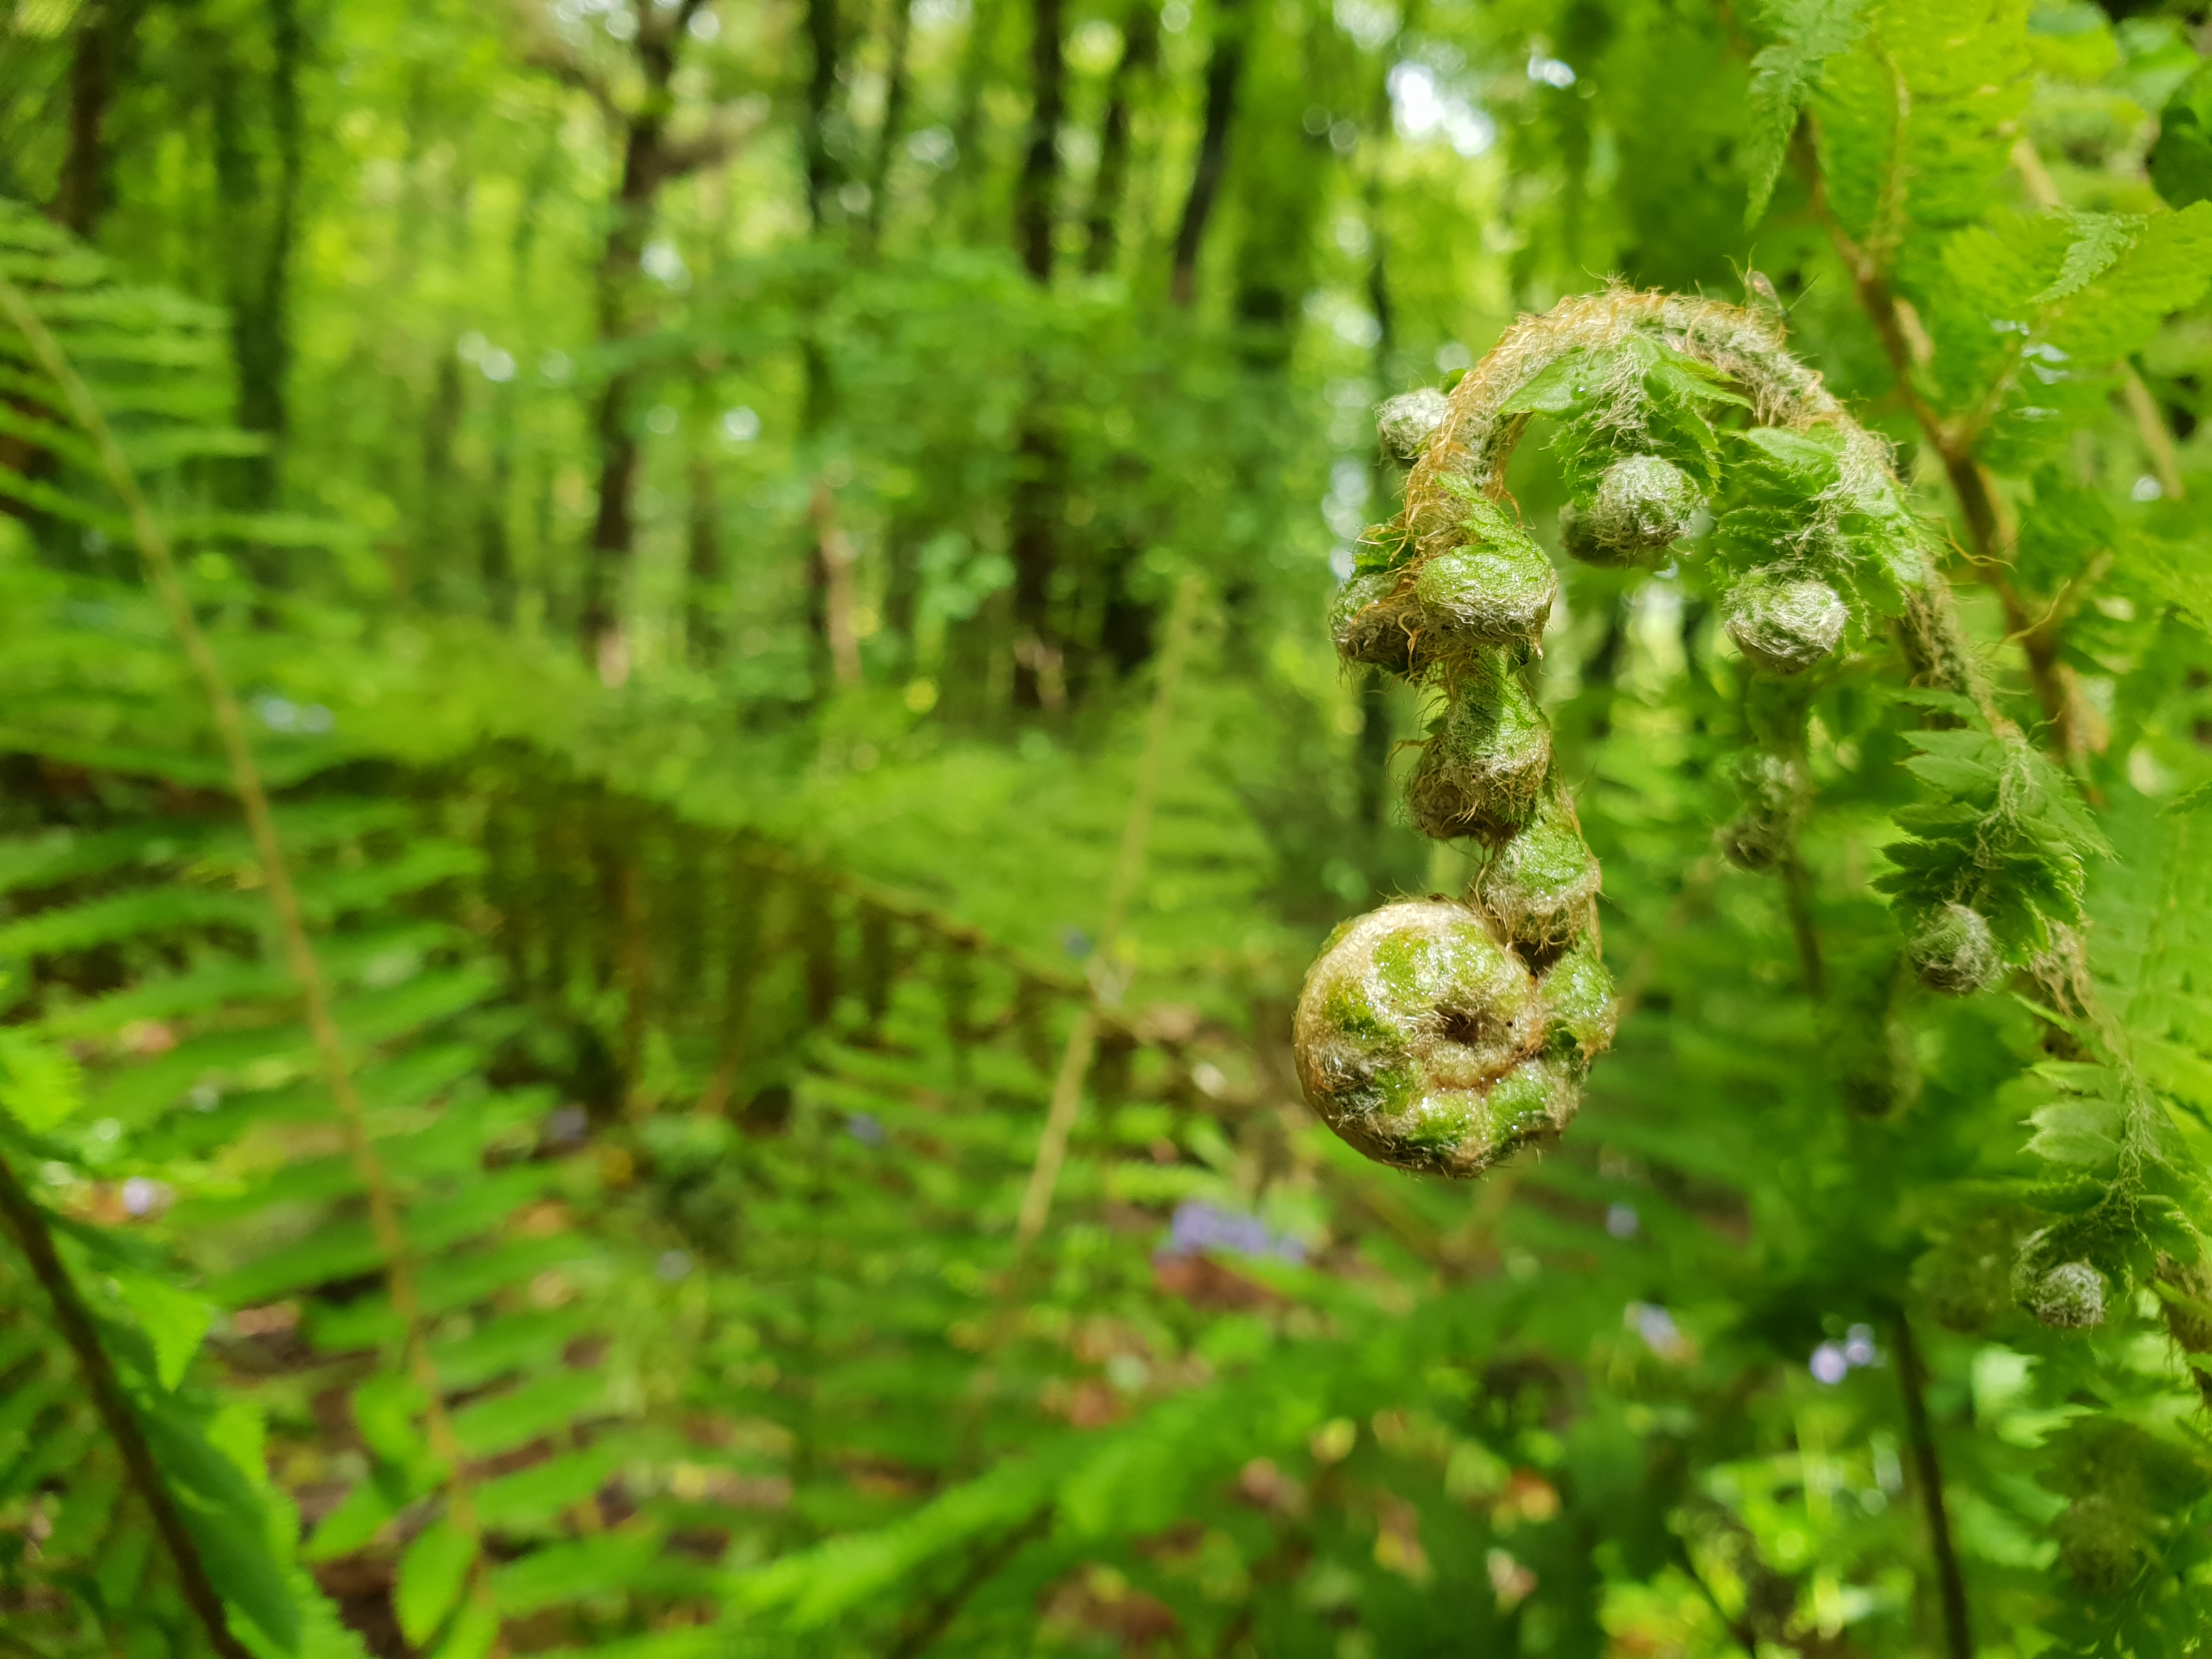 General 4032x3024 nature ferns forest plants